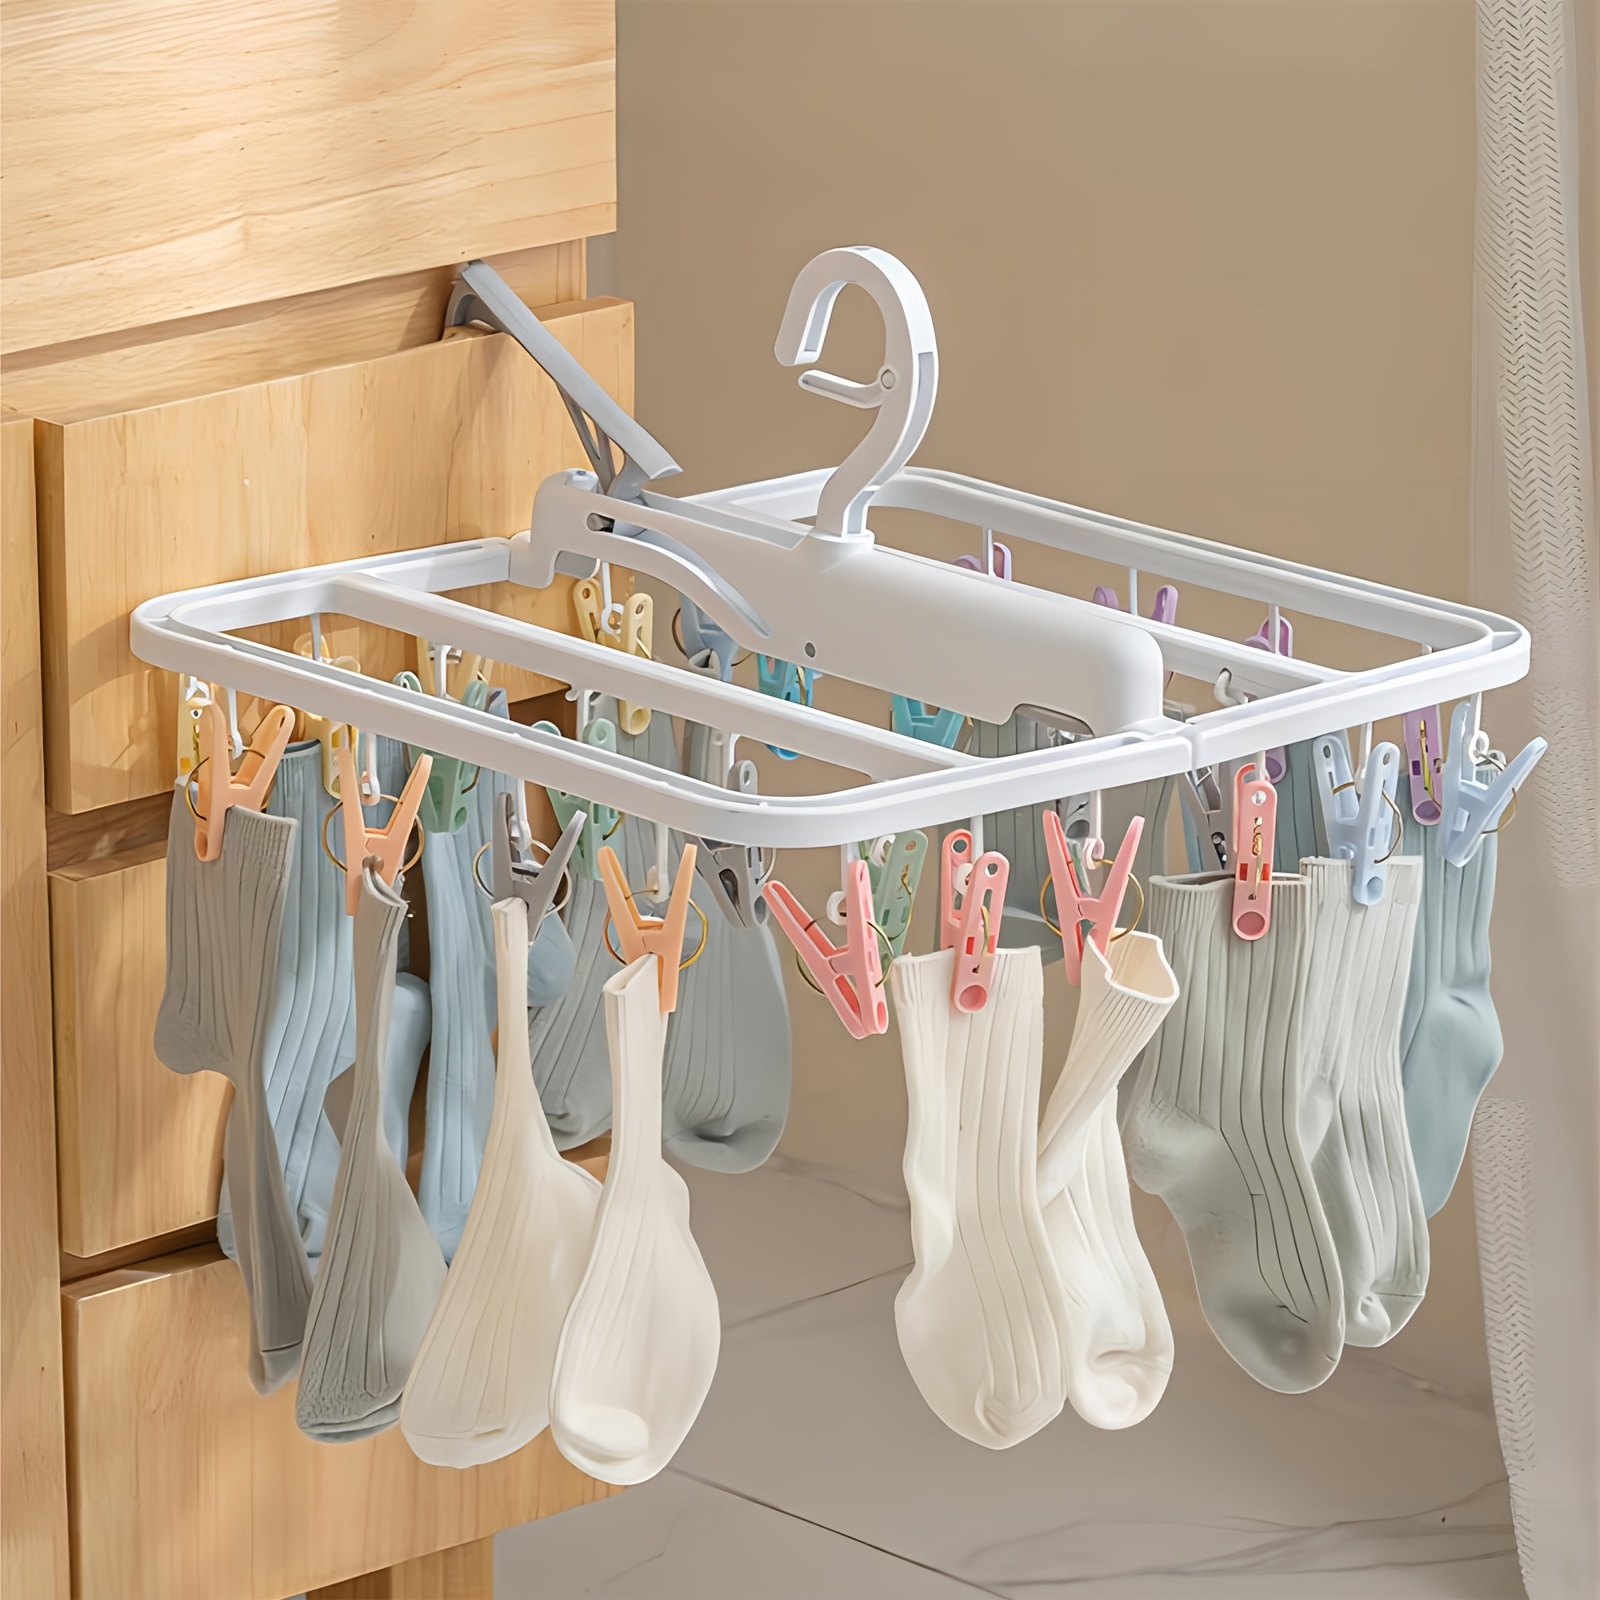 1pc Foldable 8-clip Clothes Hanger For Drying And Storing Baby Clothes,  Socks, Hats, Etc.